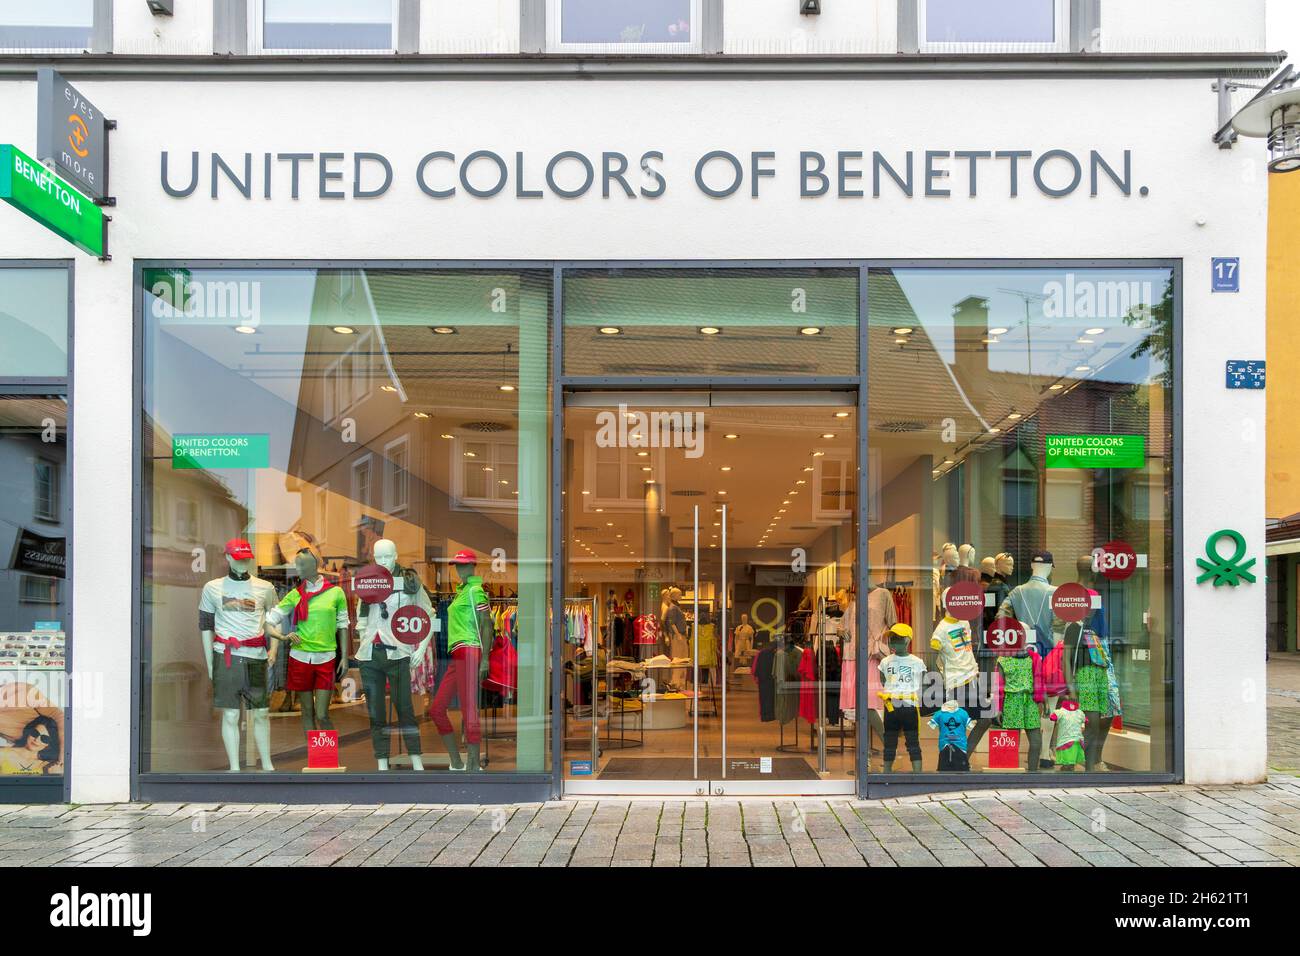 united colors of benetton branch in kempten Stock Photo - Alamy